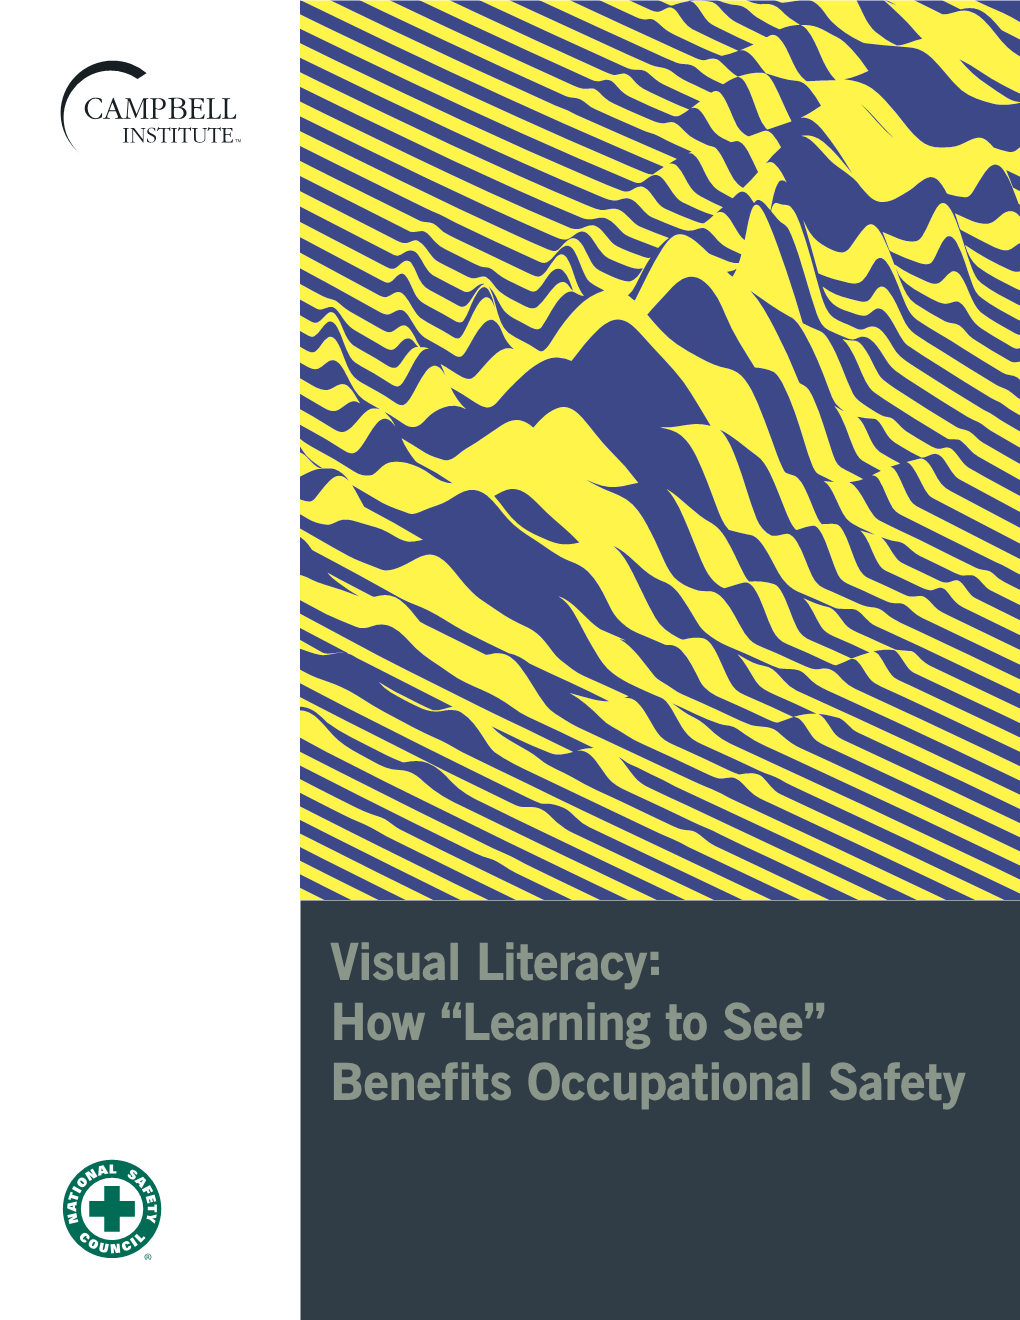 Visual Literacy: How “Learning to See” Benefits Occupational Safety